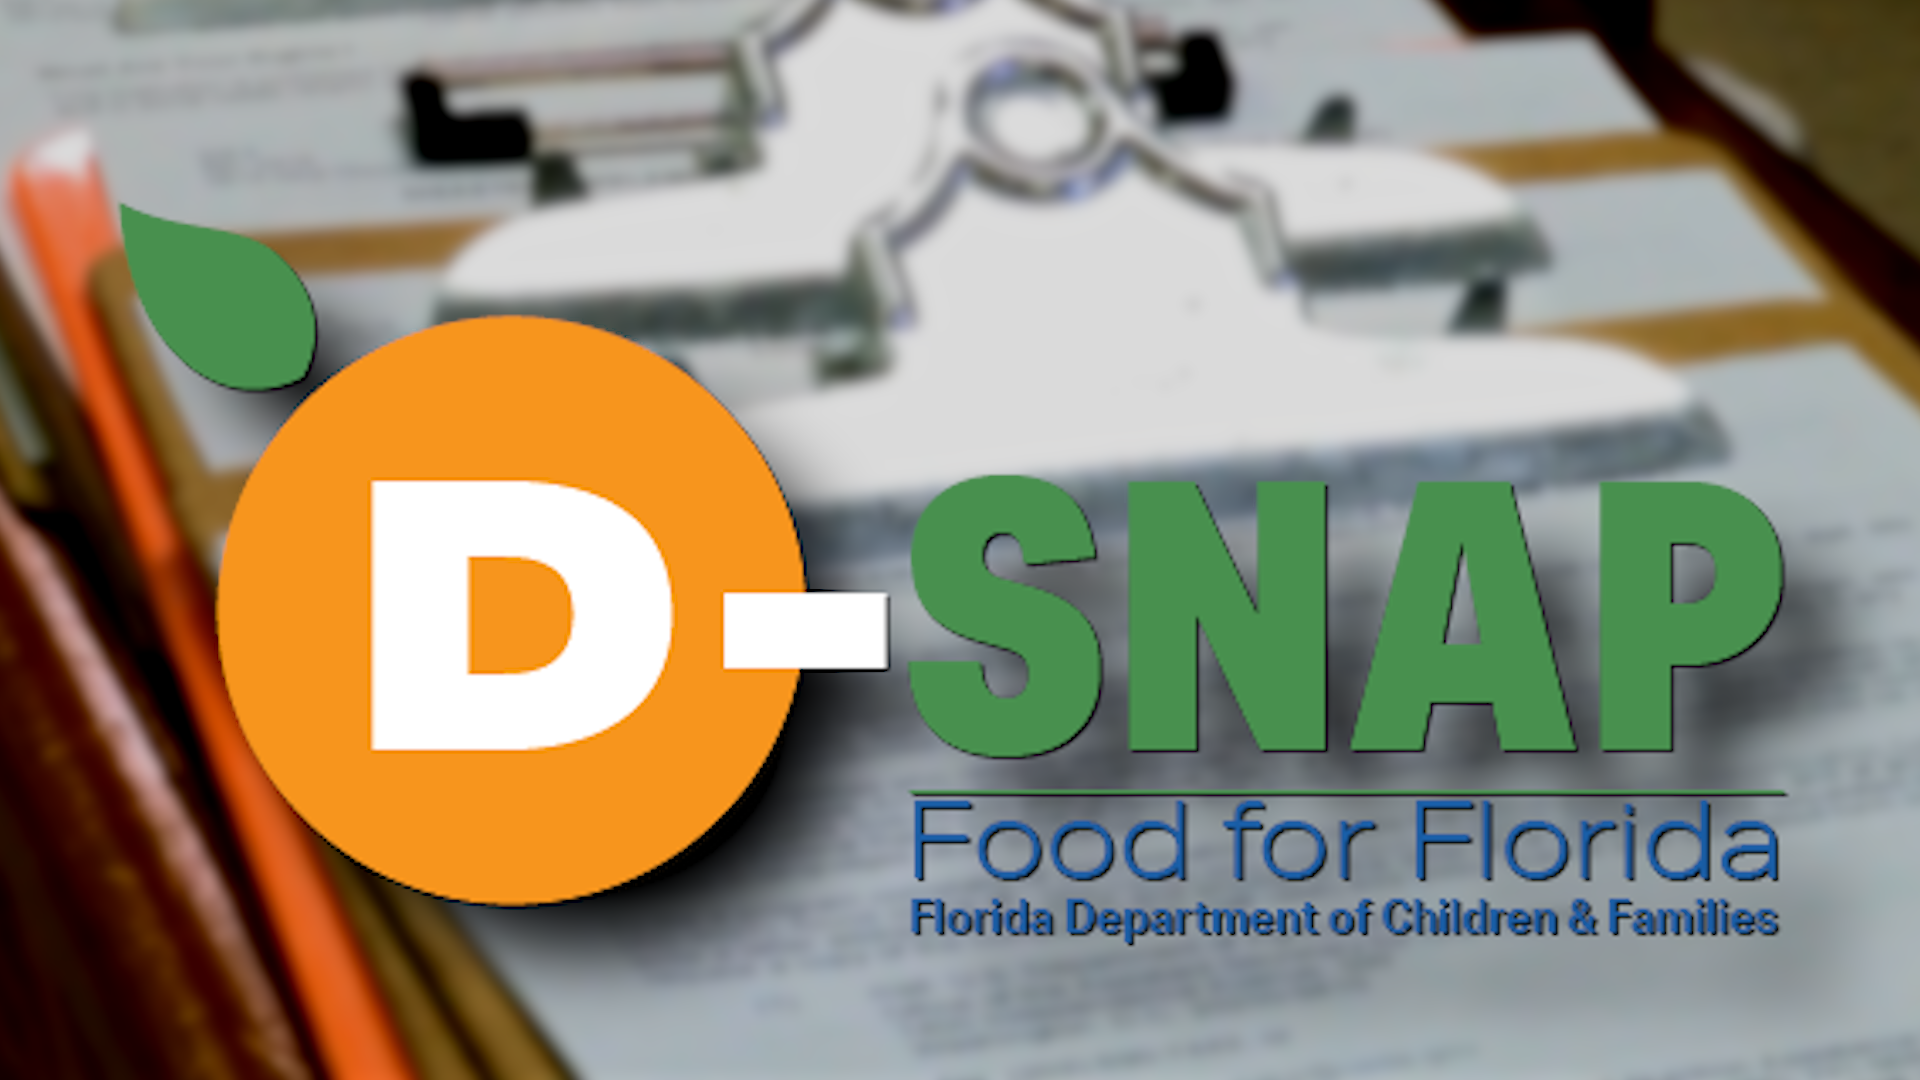 How Do I Apply for Disaster Food Stamps in Florida